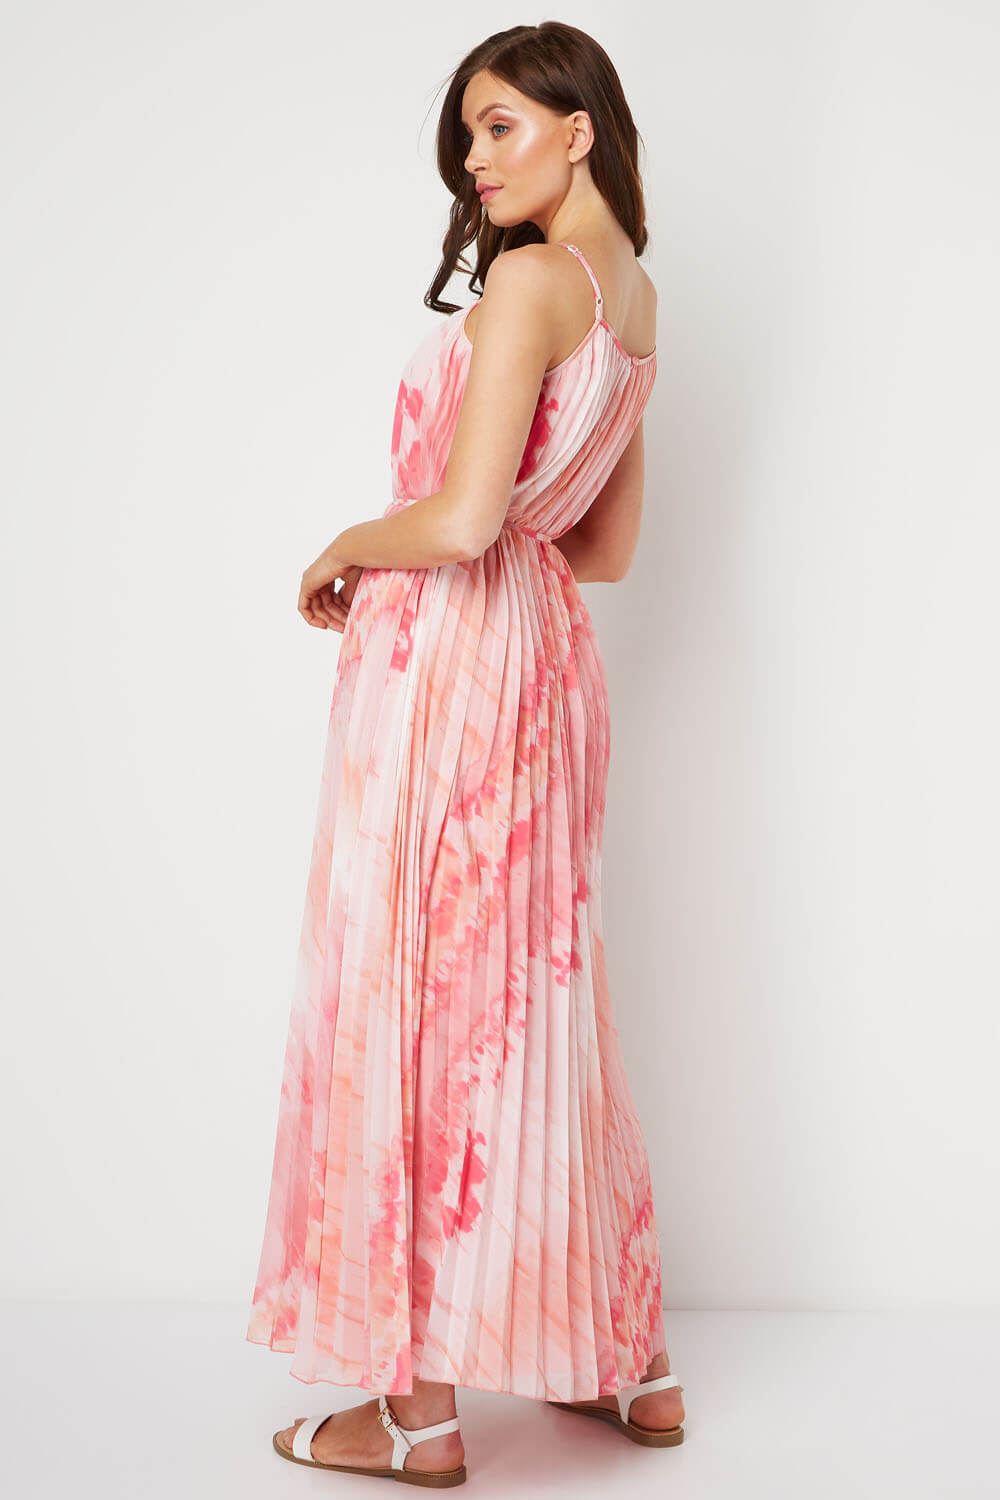 PINK Pleated Tie Dye Effect Maxi Dress, Image 3 of 4